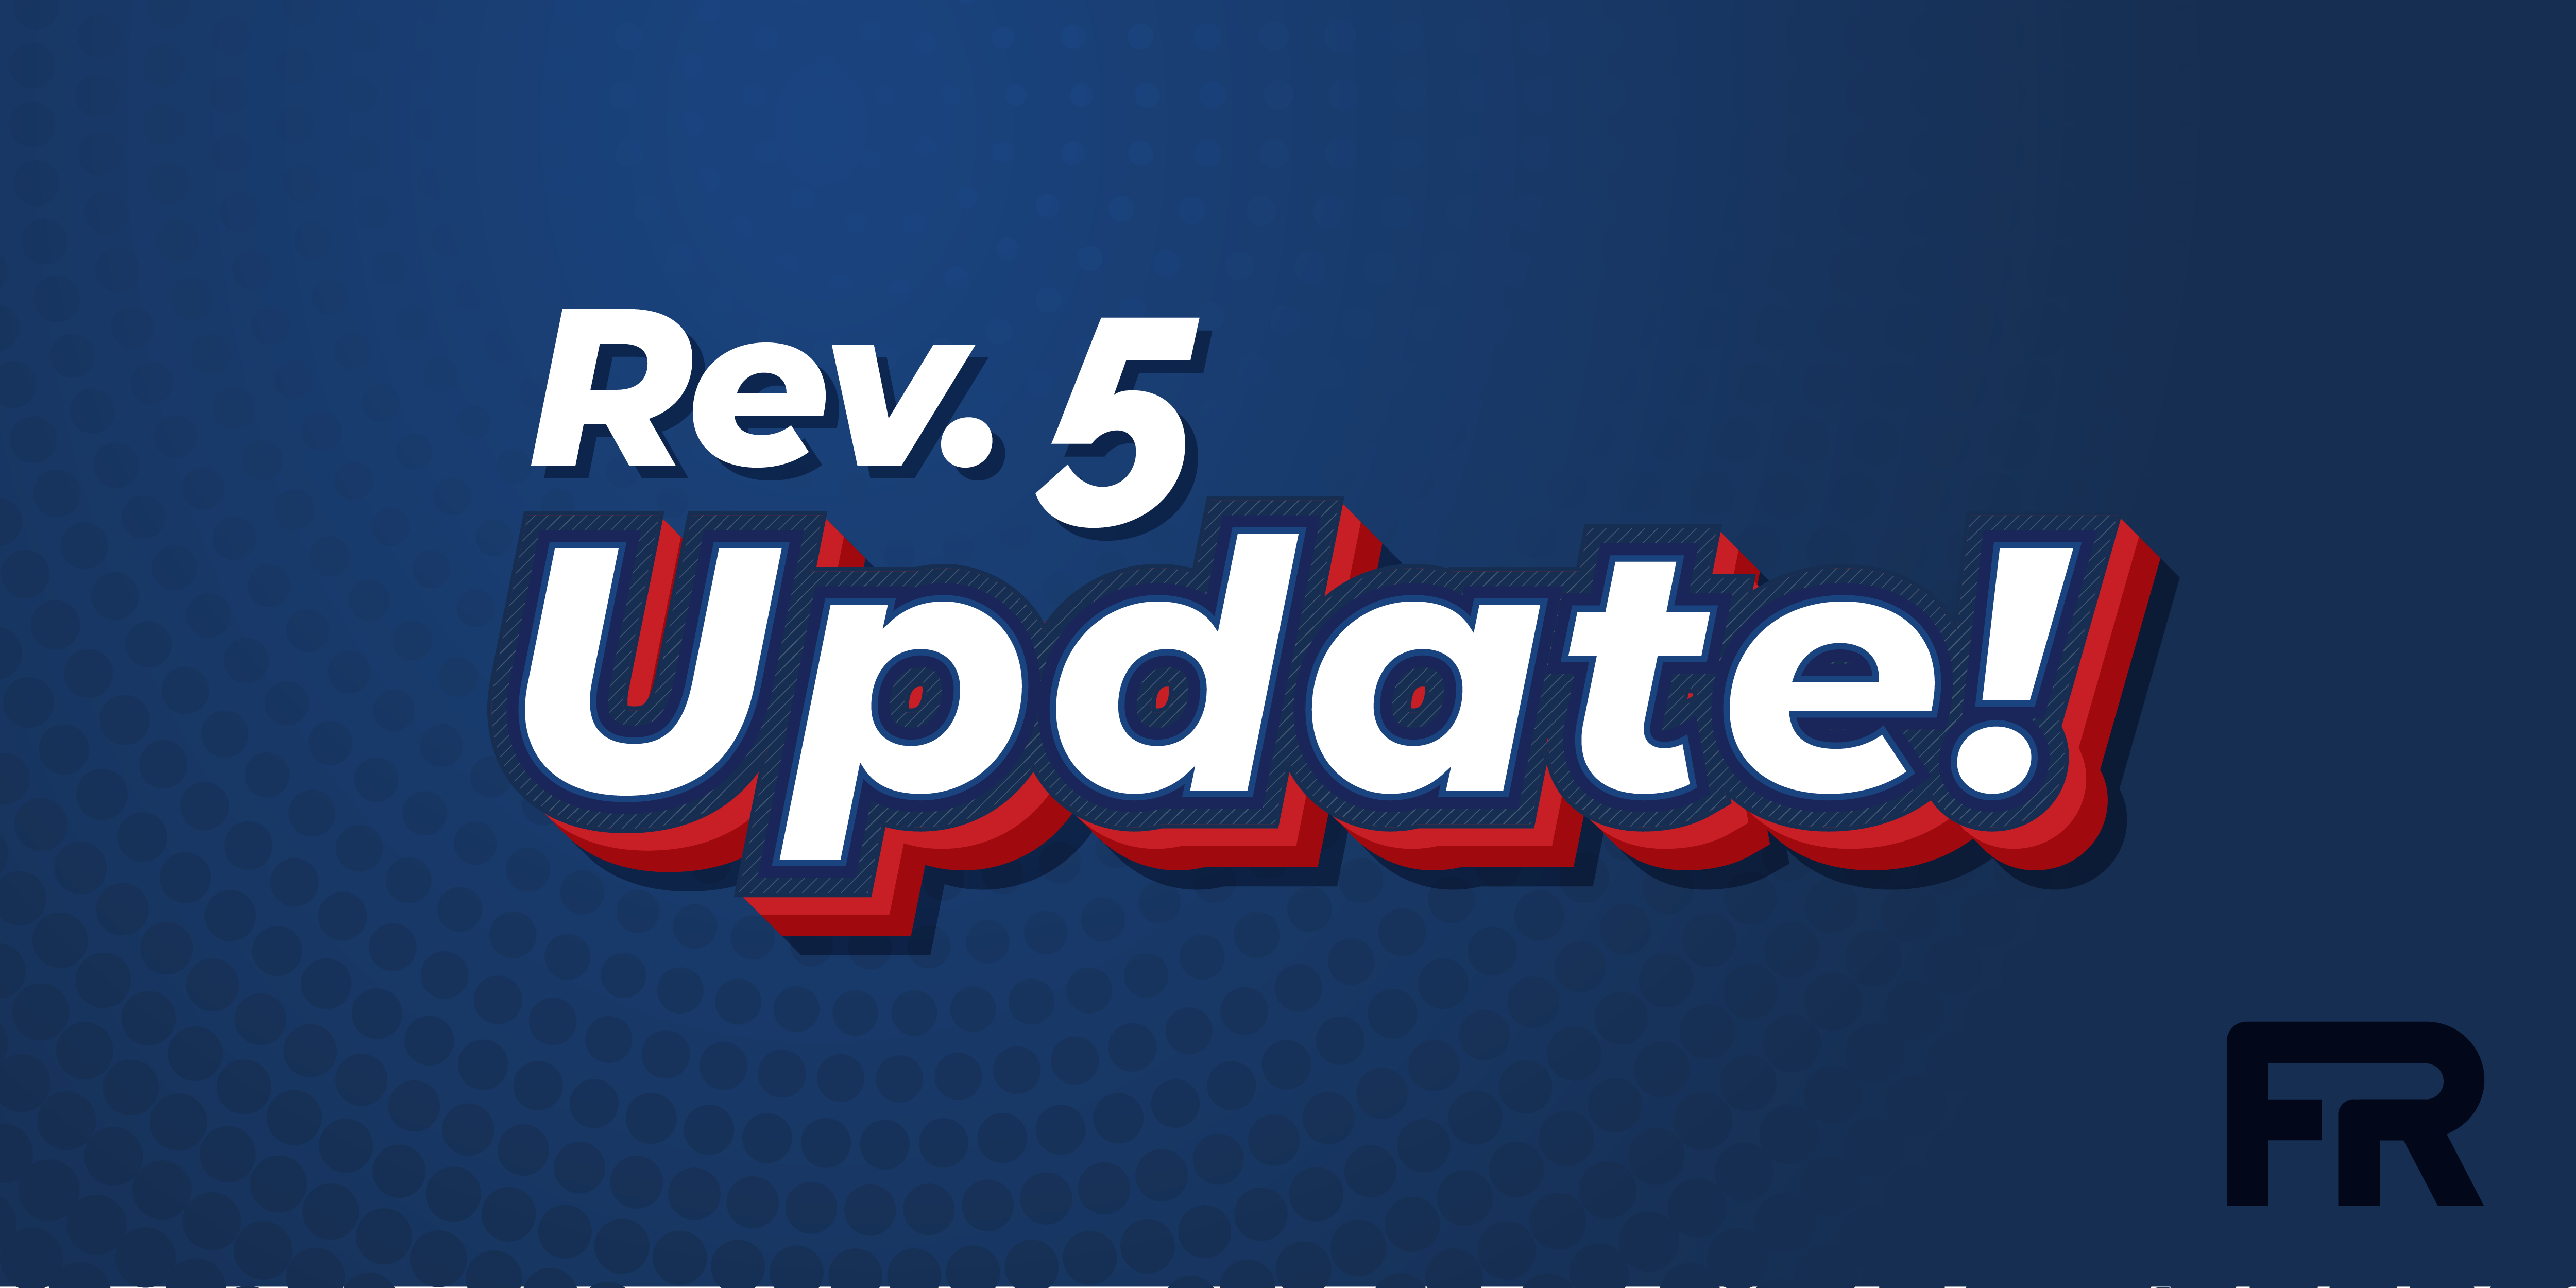 Rev. 5 - Additional Documents Released